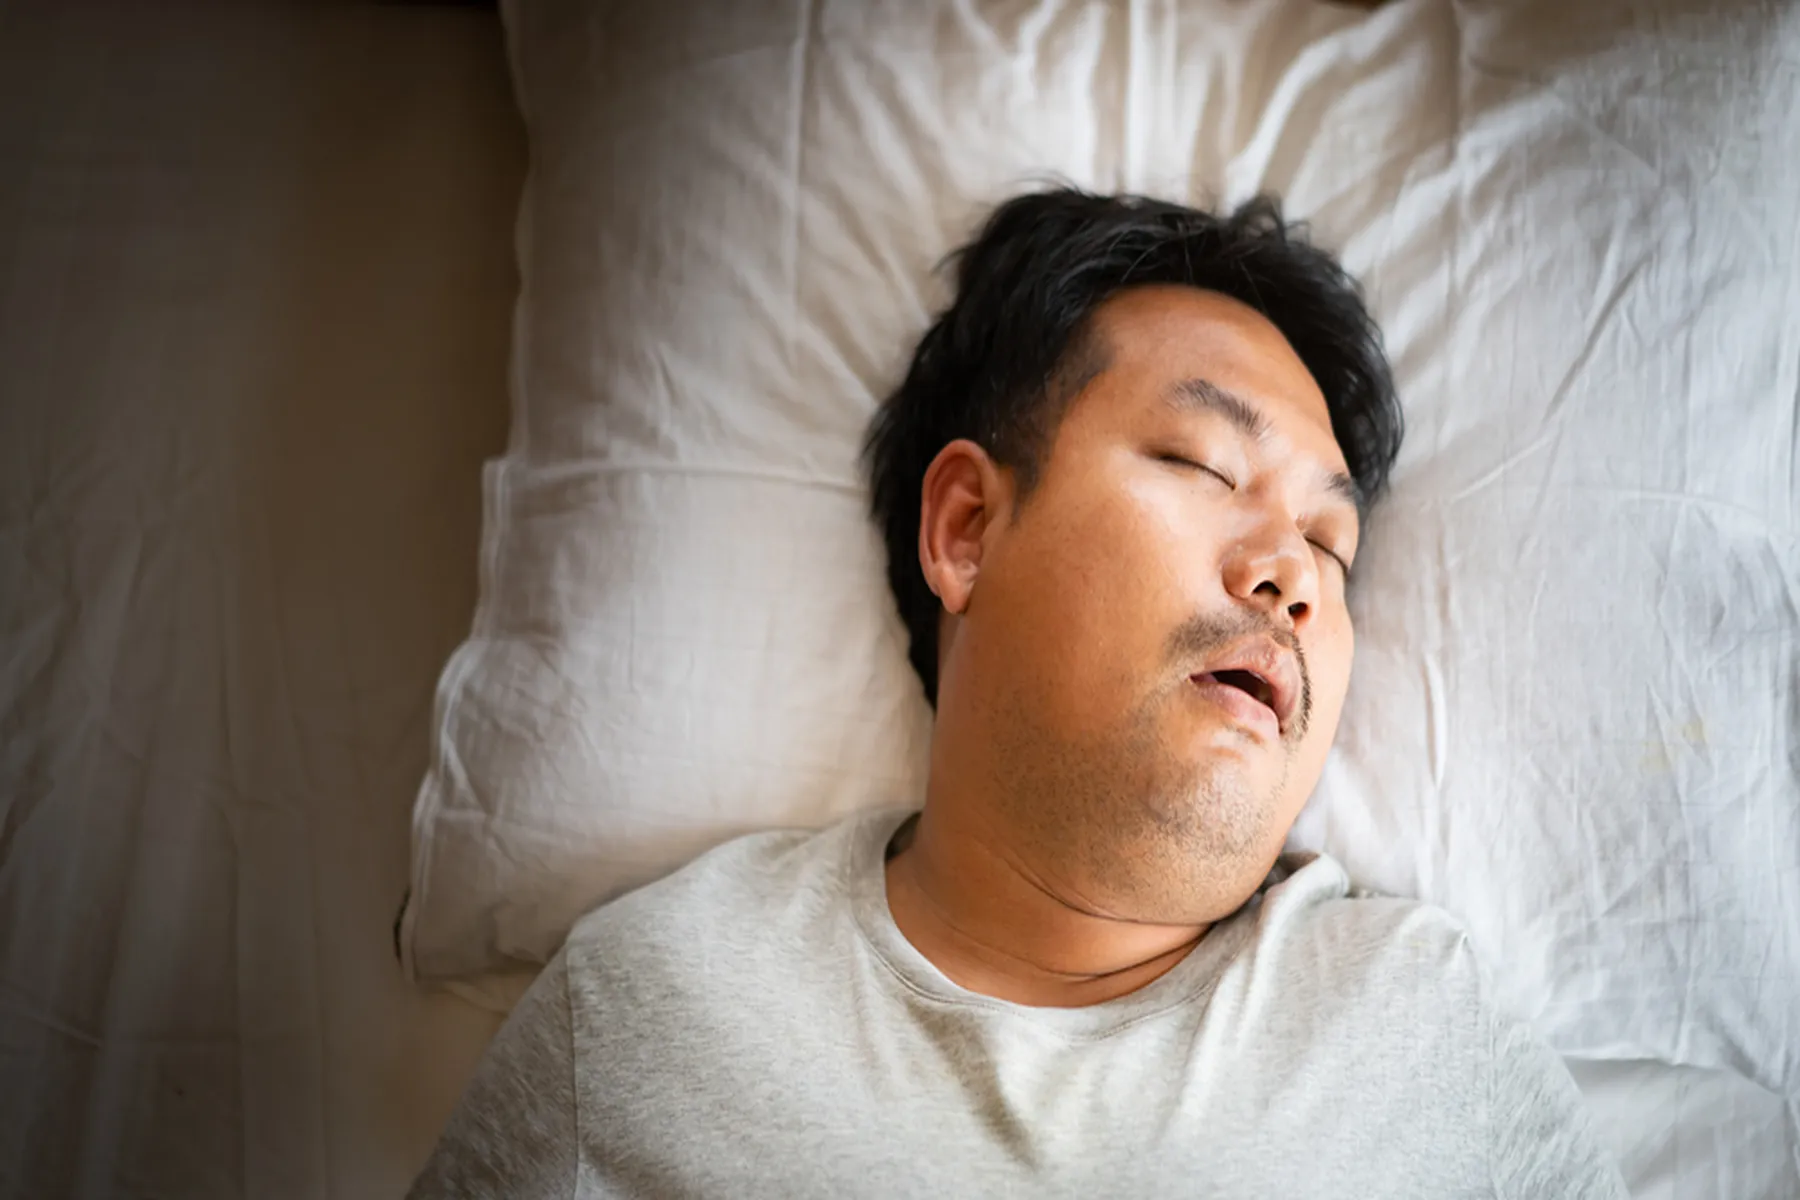  A young man in a white t-shirt lies on a white pillow. He is sleeping with his mouth partly open, and he looks to be snoring. 